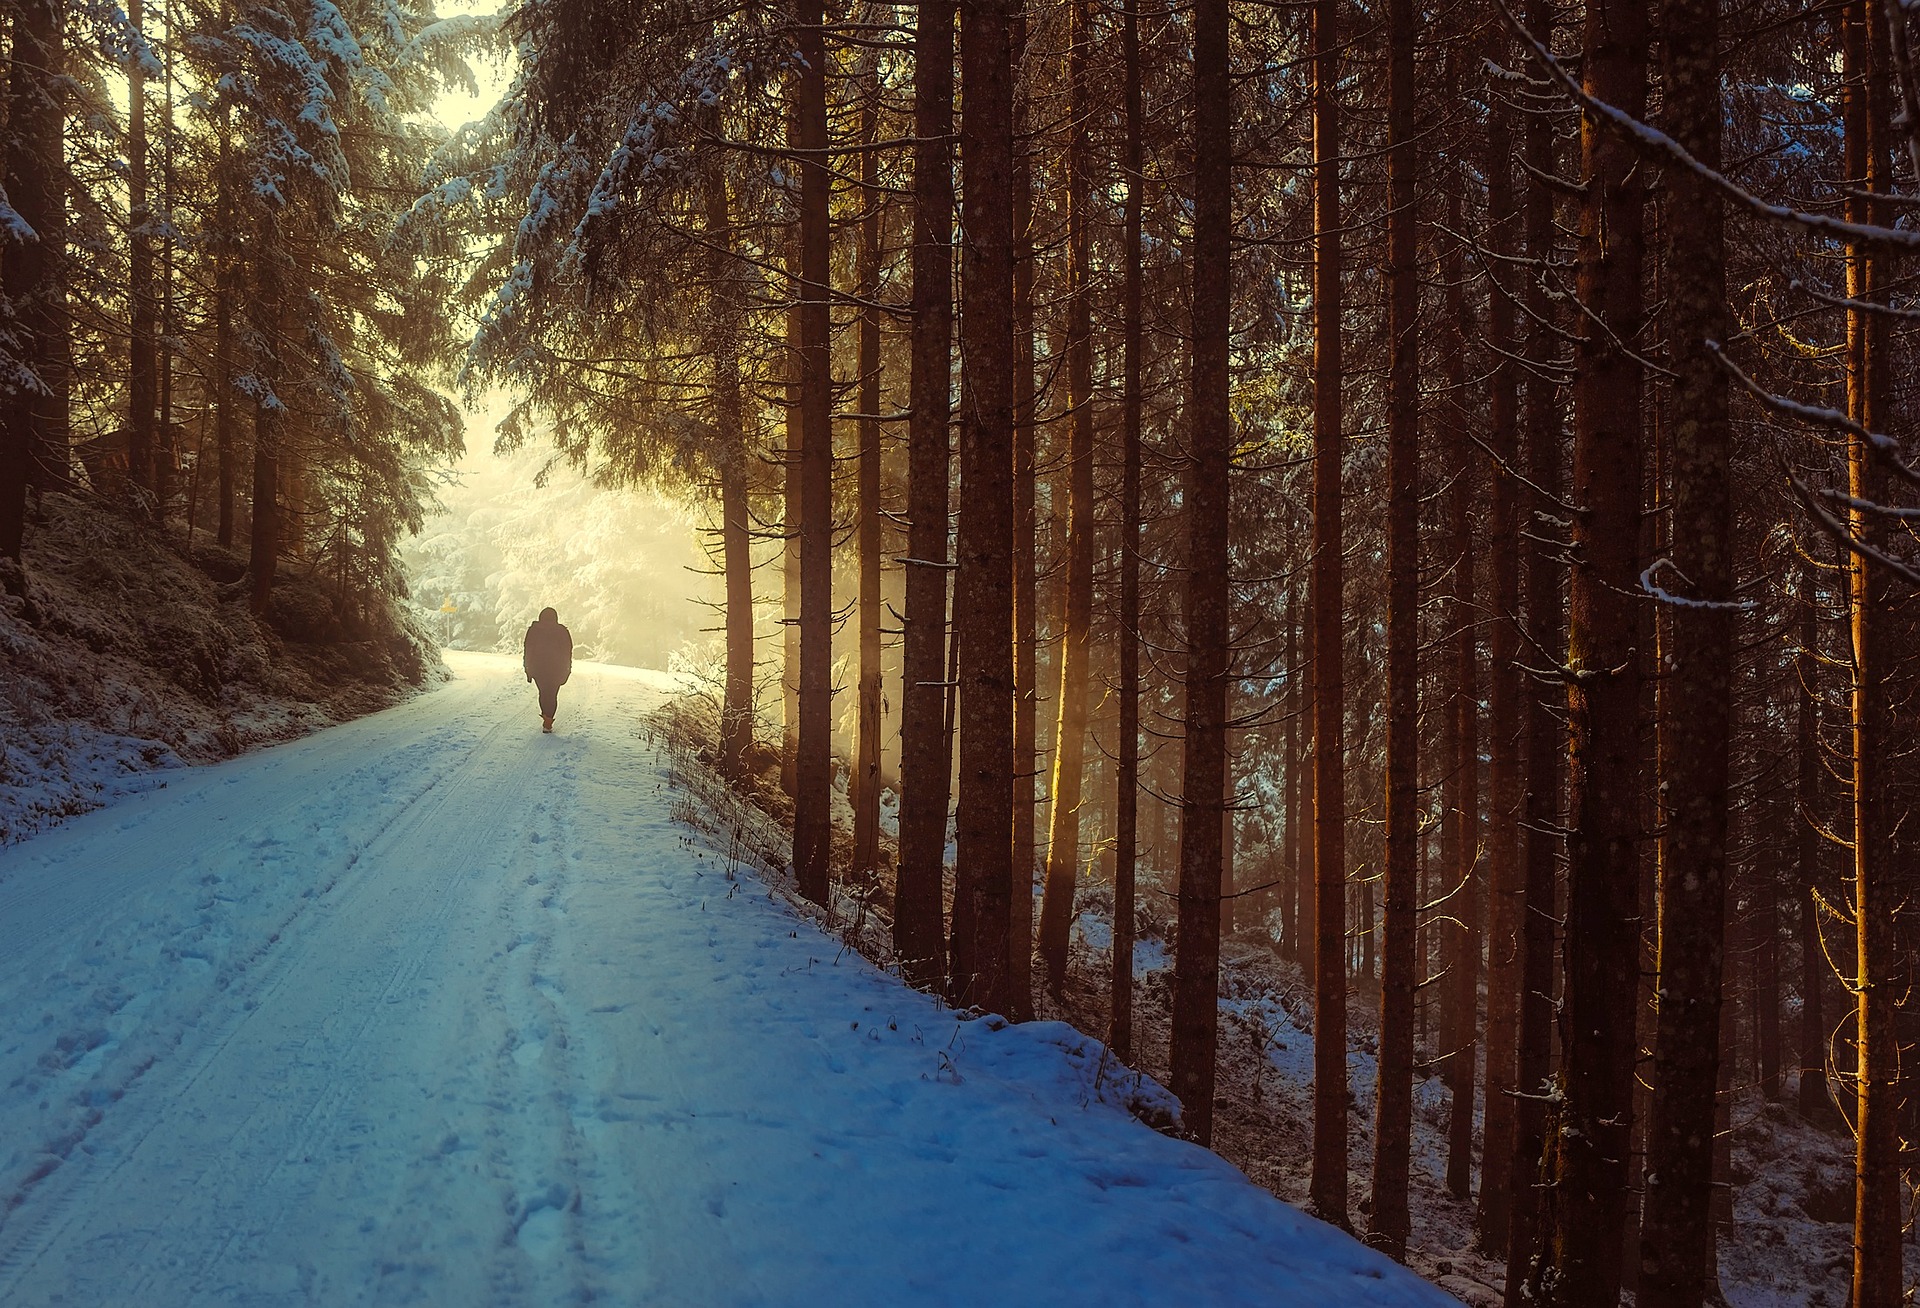 A man hiking through a snowy path in the forest